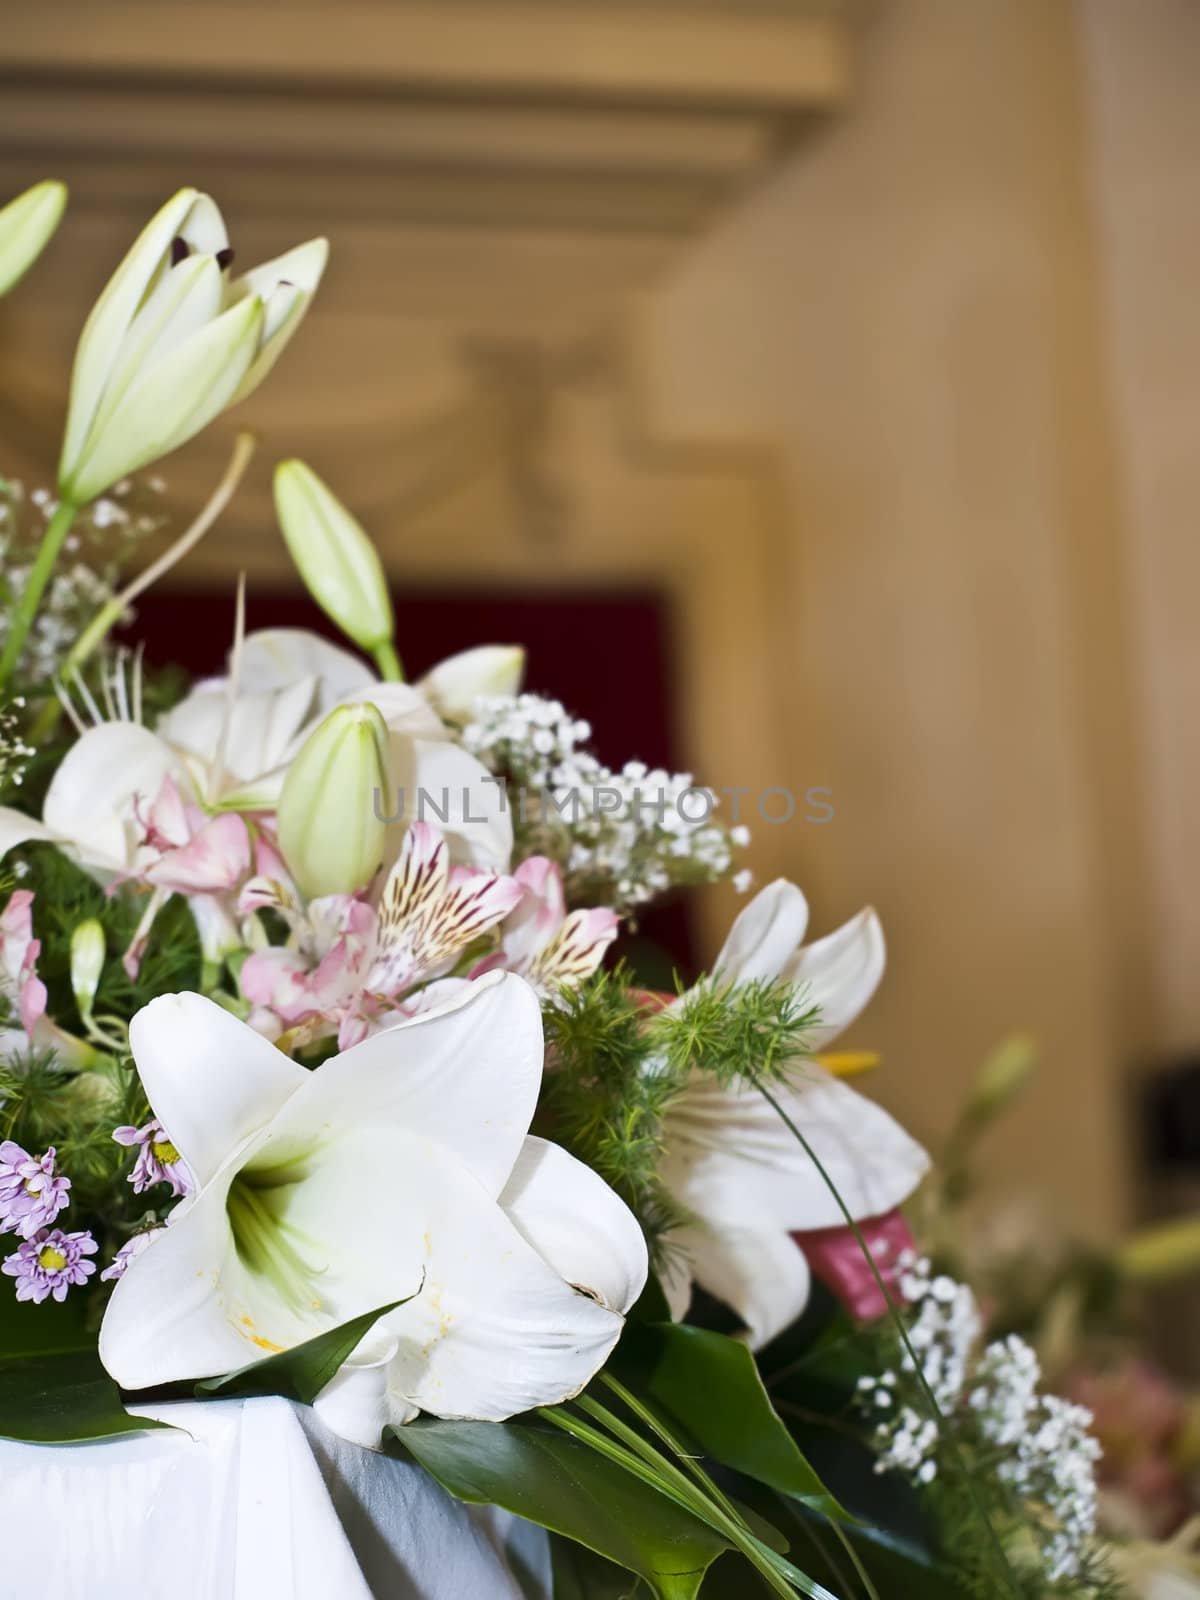 Detail of a bridal bouquet during a wedding ceremony